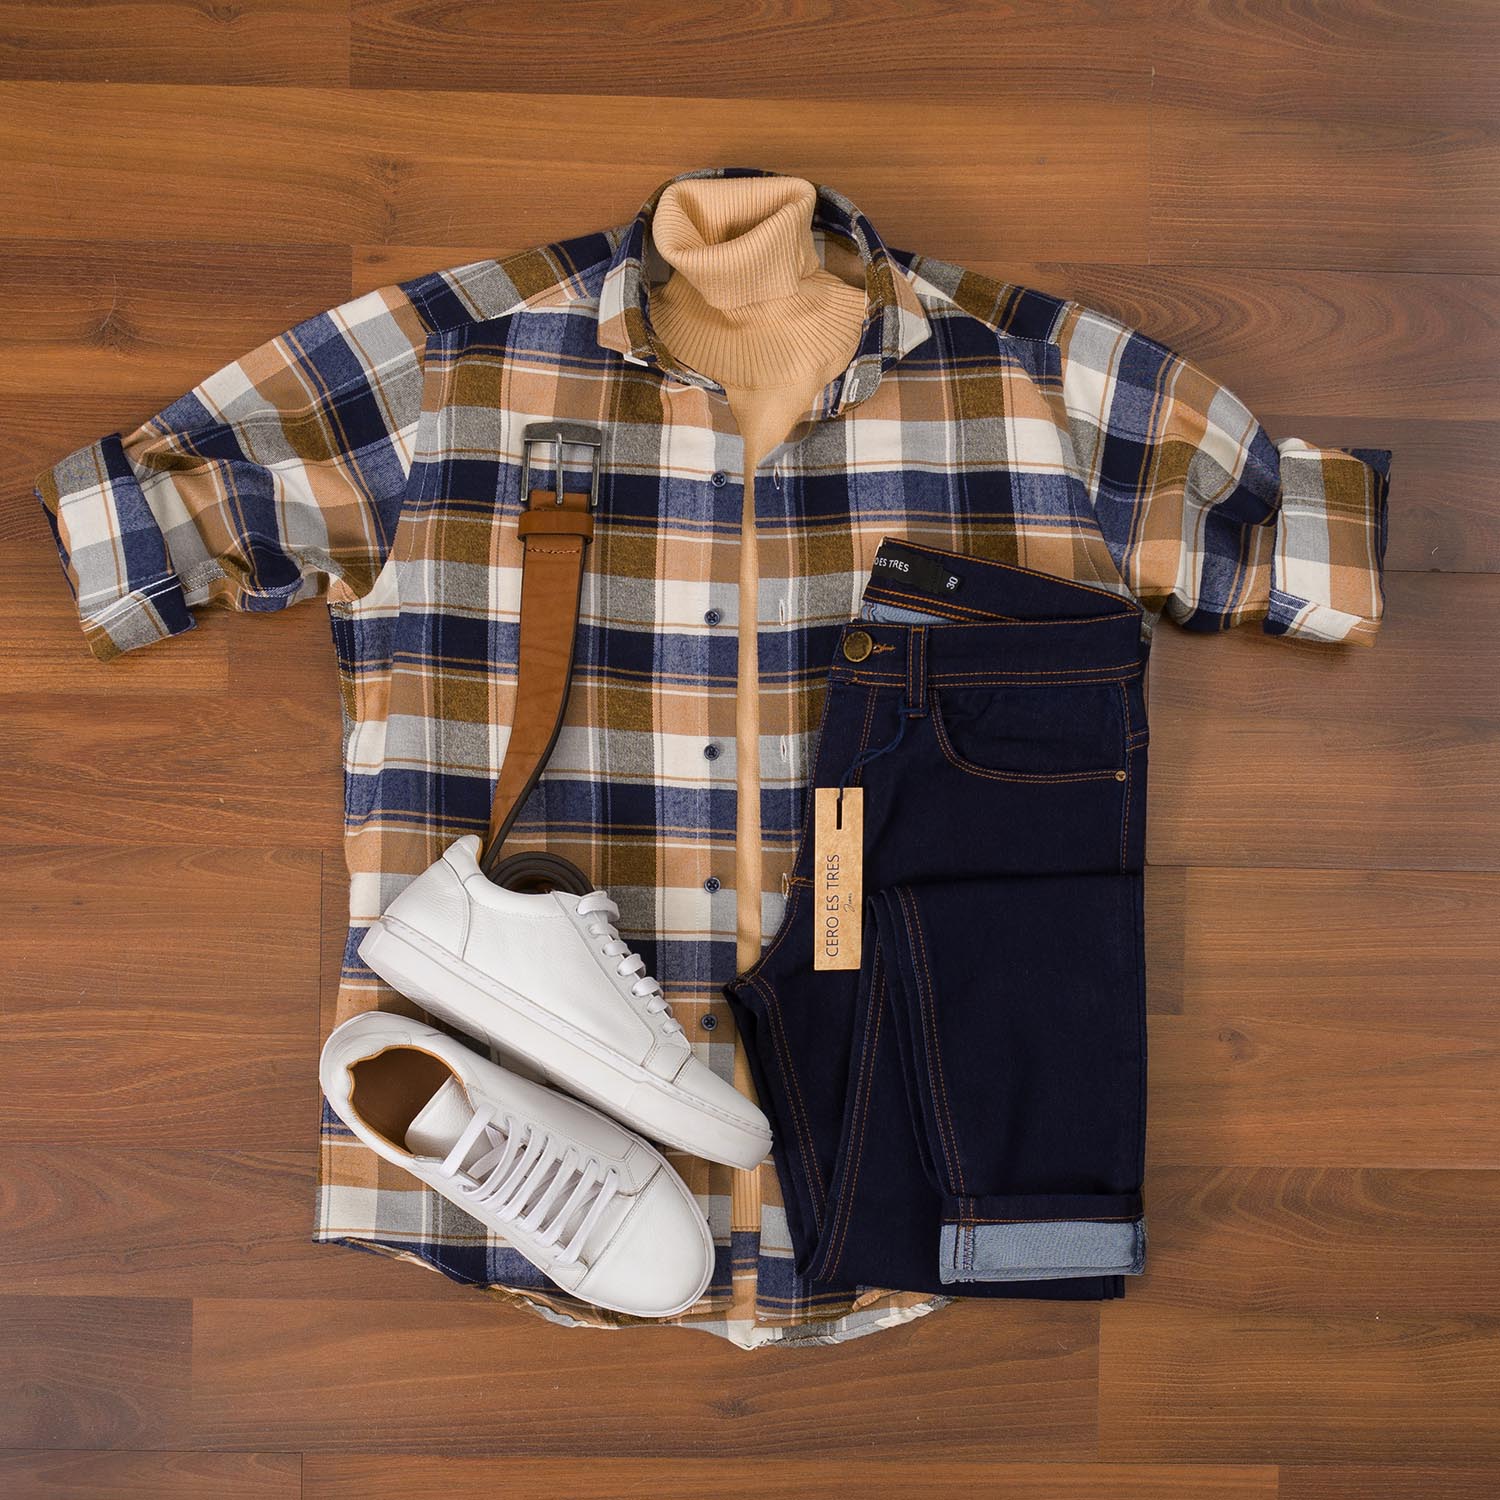 OUTFIT CERO 333